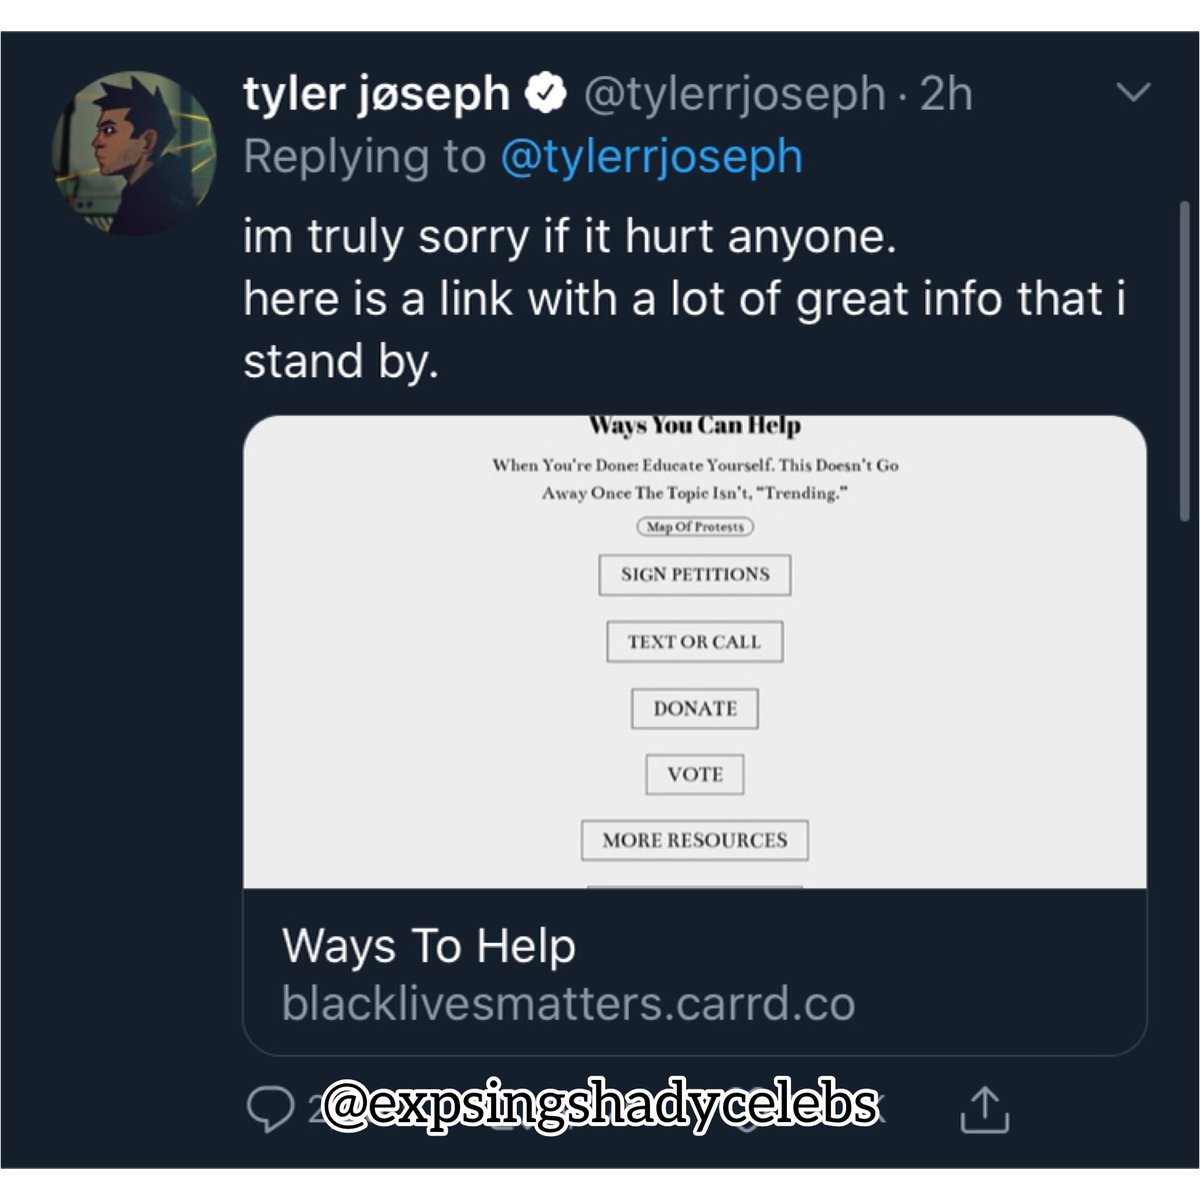 Twenty One Pilots member Tyler Joseph is receiving backlash after after he tweeted in regards to his fans wanting him to use his platform to speak out against police brutality Pt1